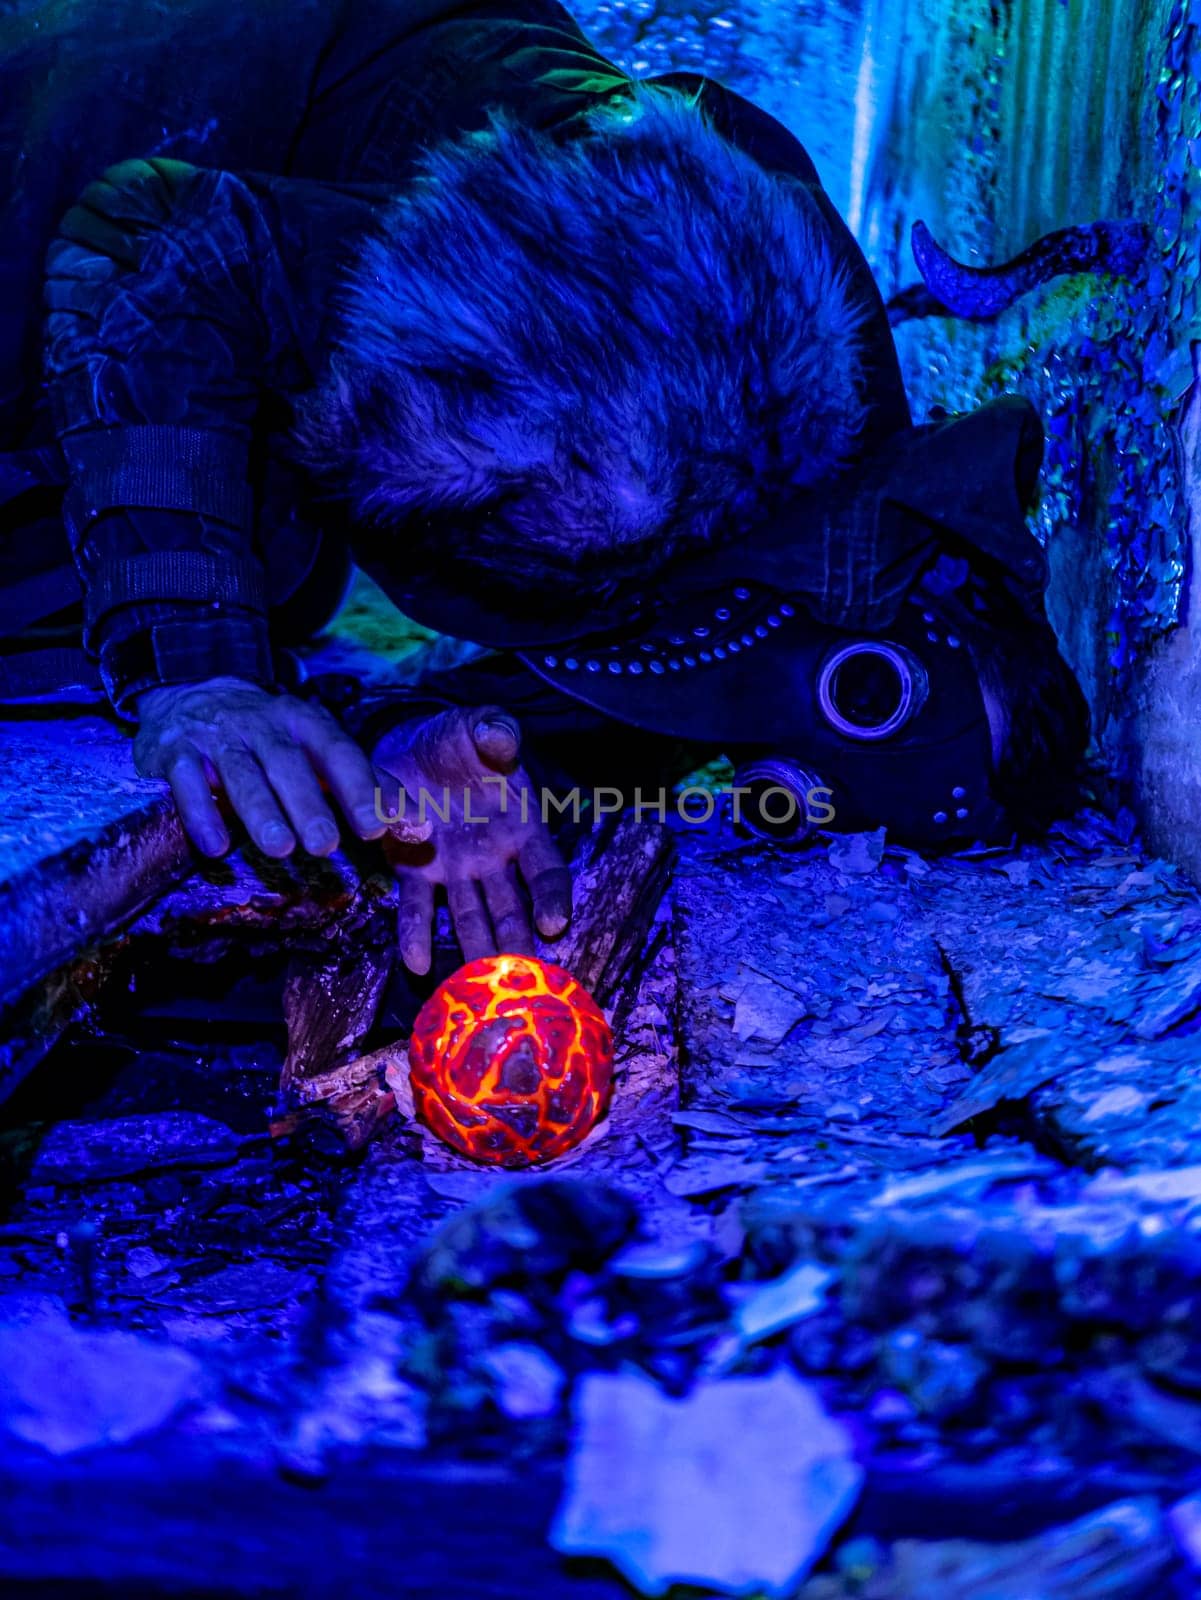 Cosplay of a stalker lying on the floor of an abandoned house in a plague doctor mask and holding a mysterious artifact. art photo